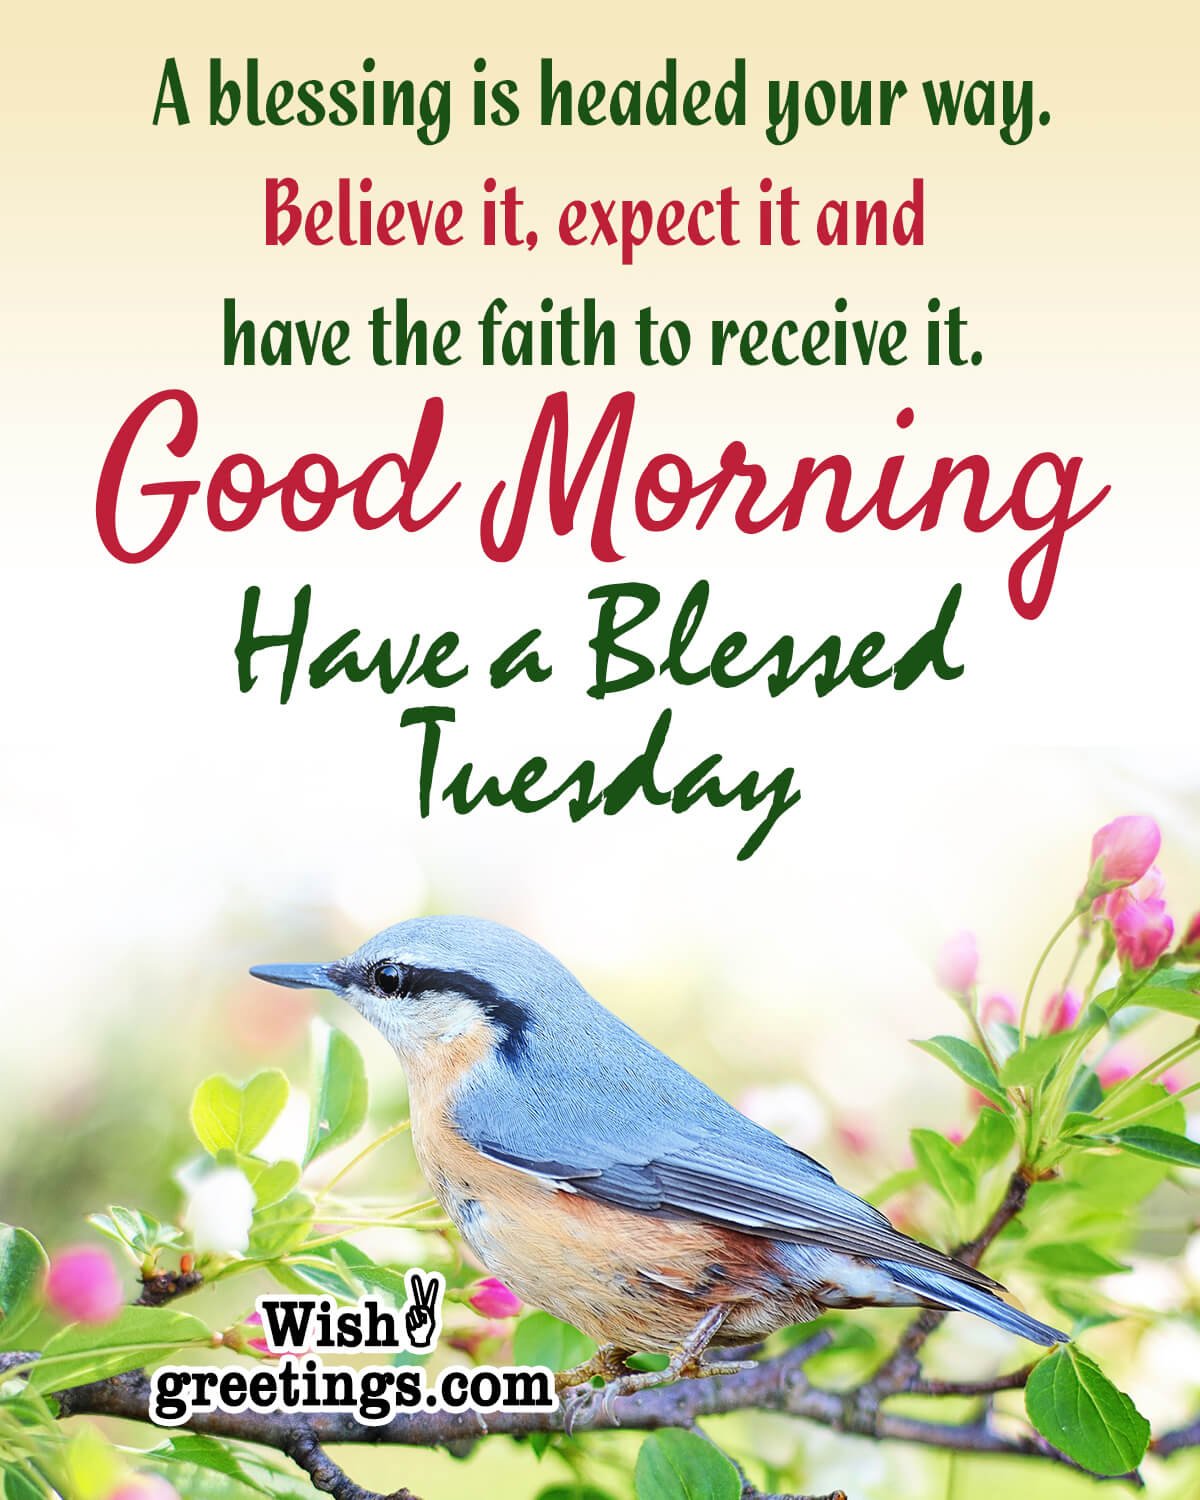 Good Morning Tuesday Blessing Quote